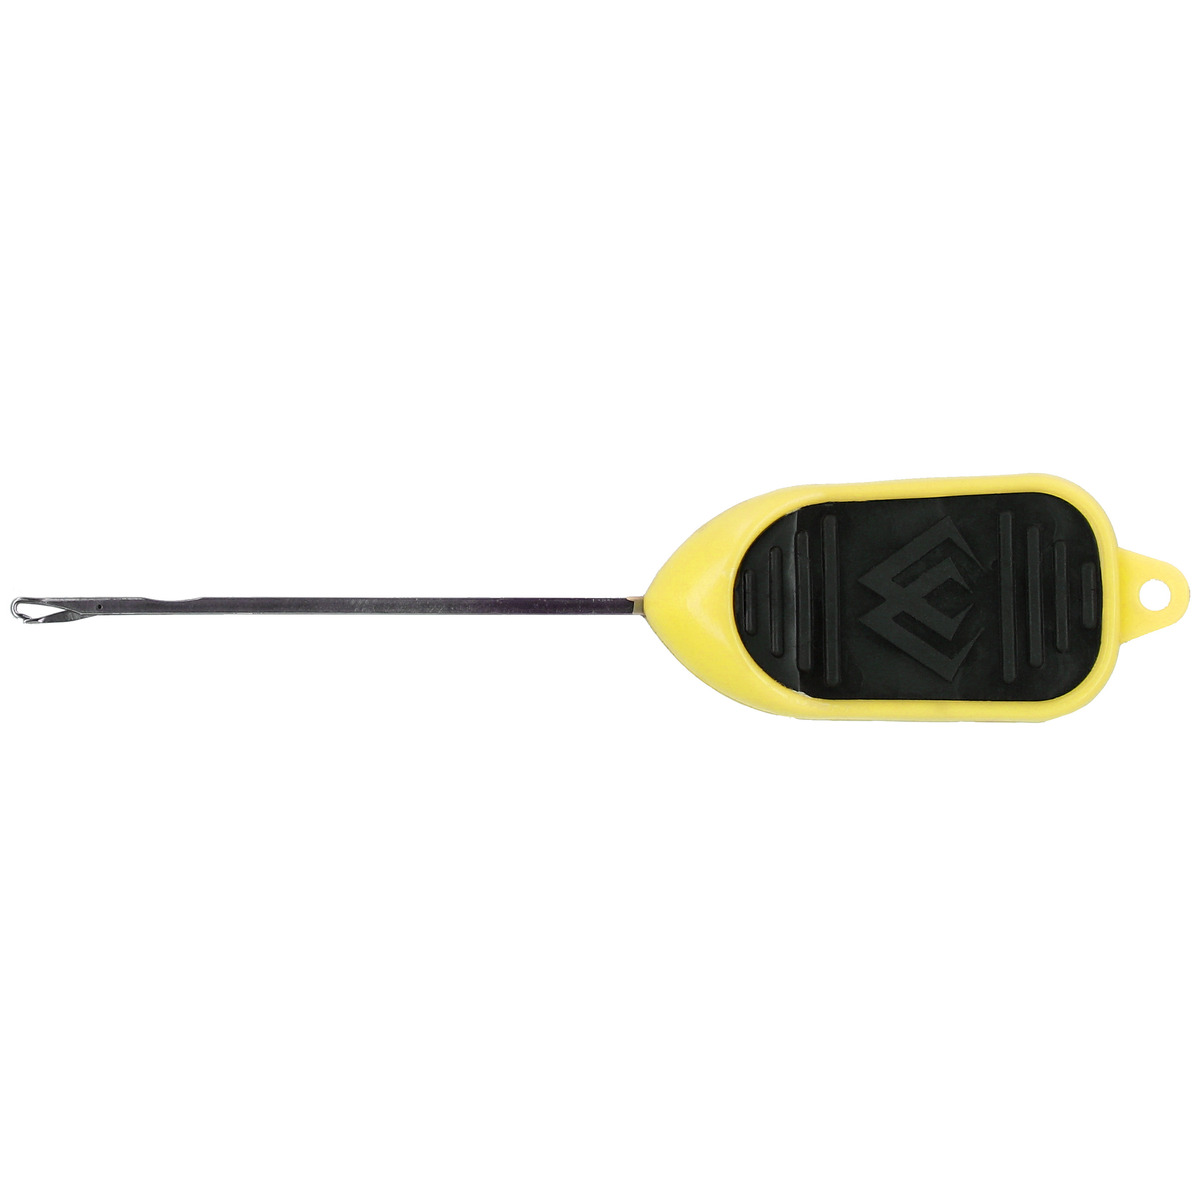 Mikado Baiting Needle - GATED NEEDLE FOR BOILIES HQ